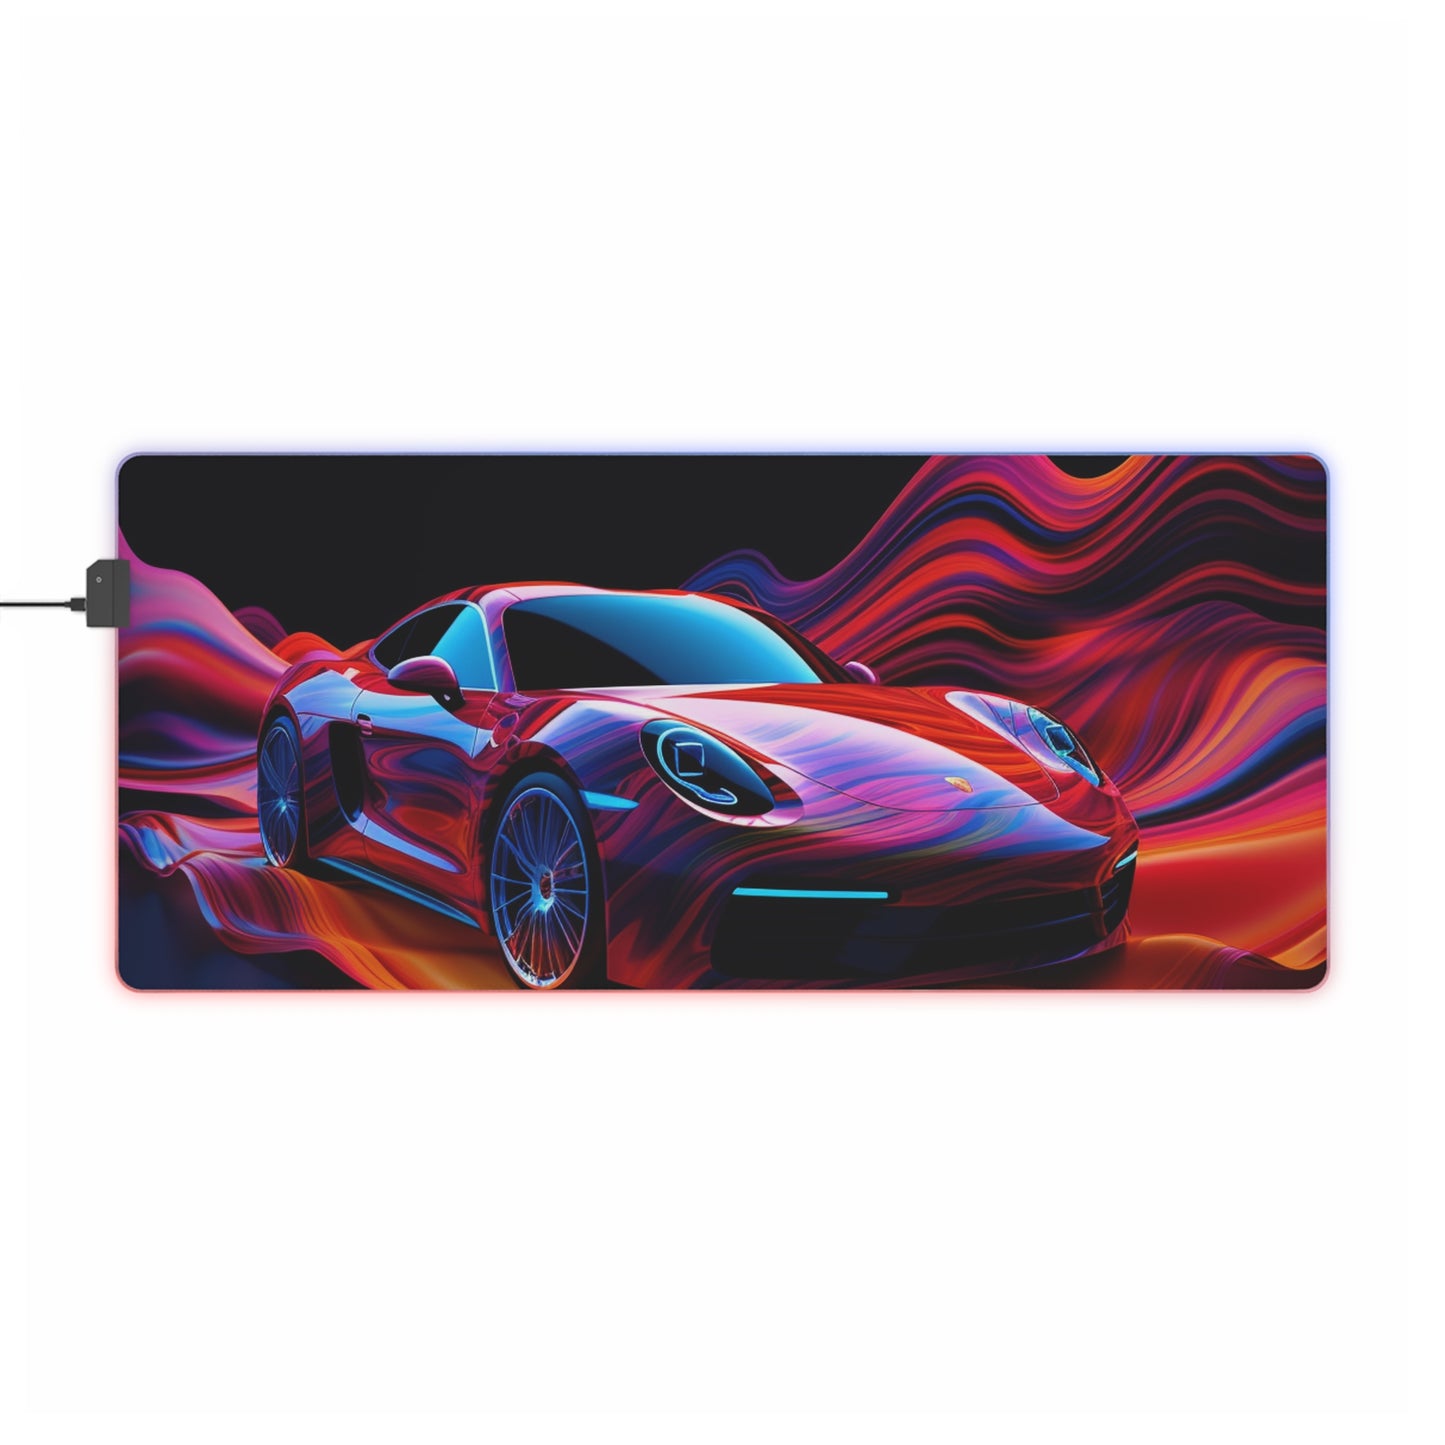 LED Gaming Mouse Pad Porsche Water Fusion 4